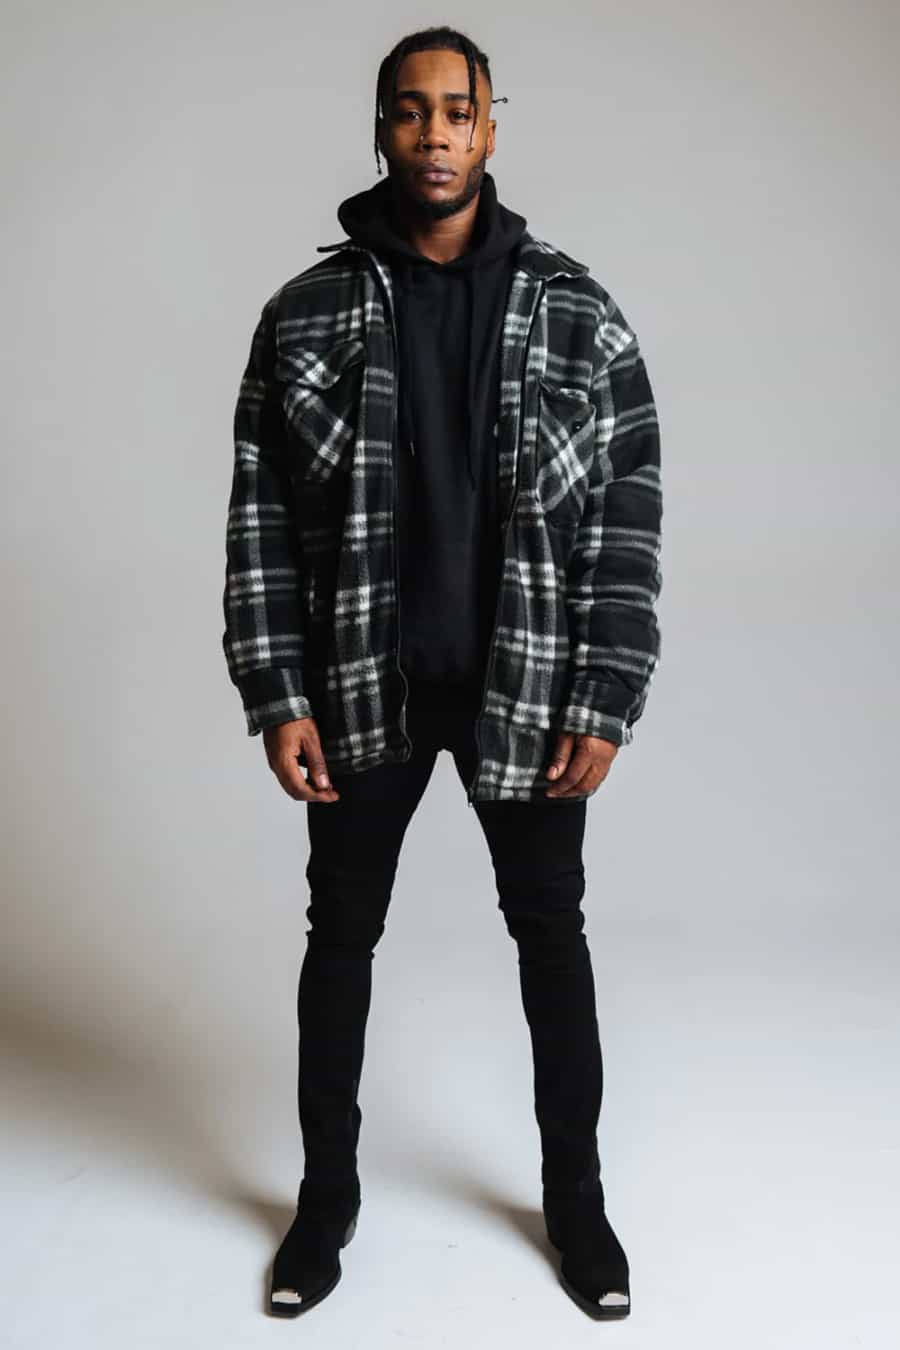 Men's black jeans, black hoodie, black and white checked flannel shirt and black boots outfit